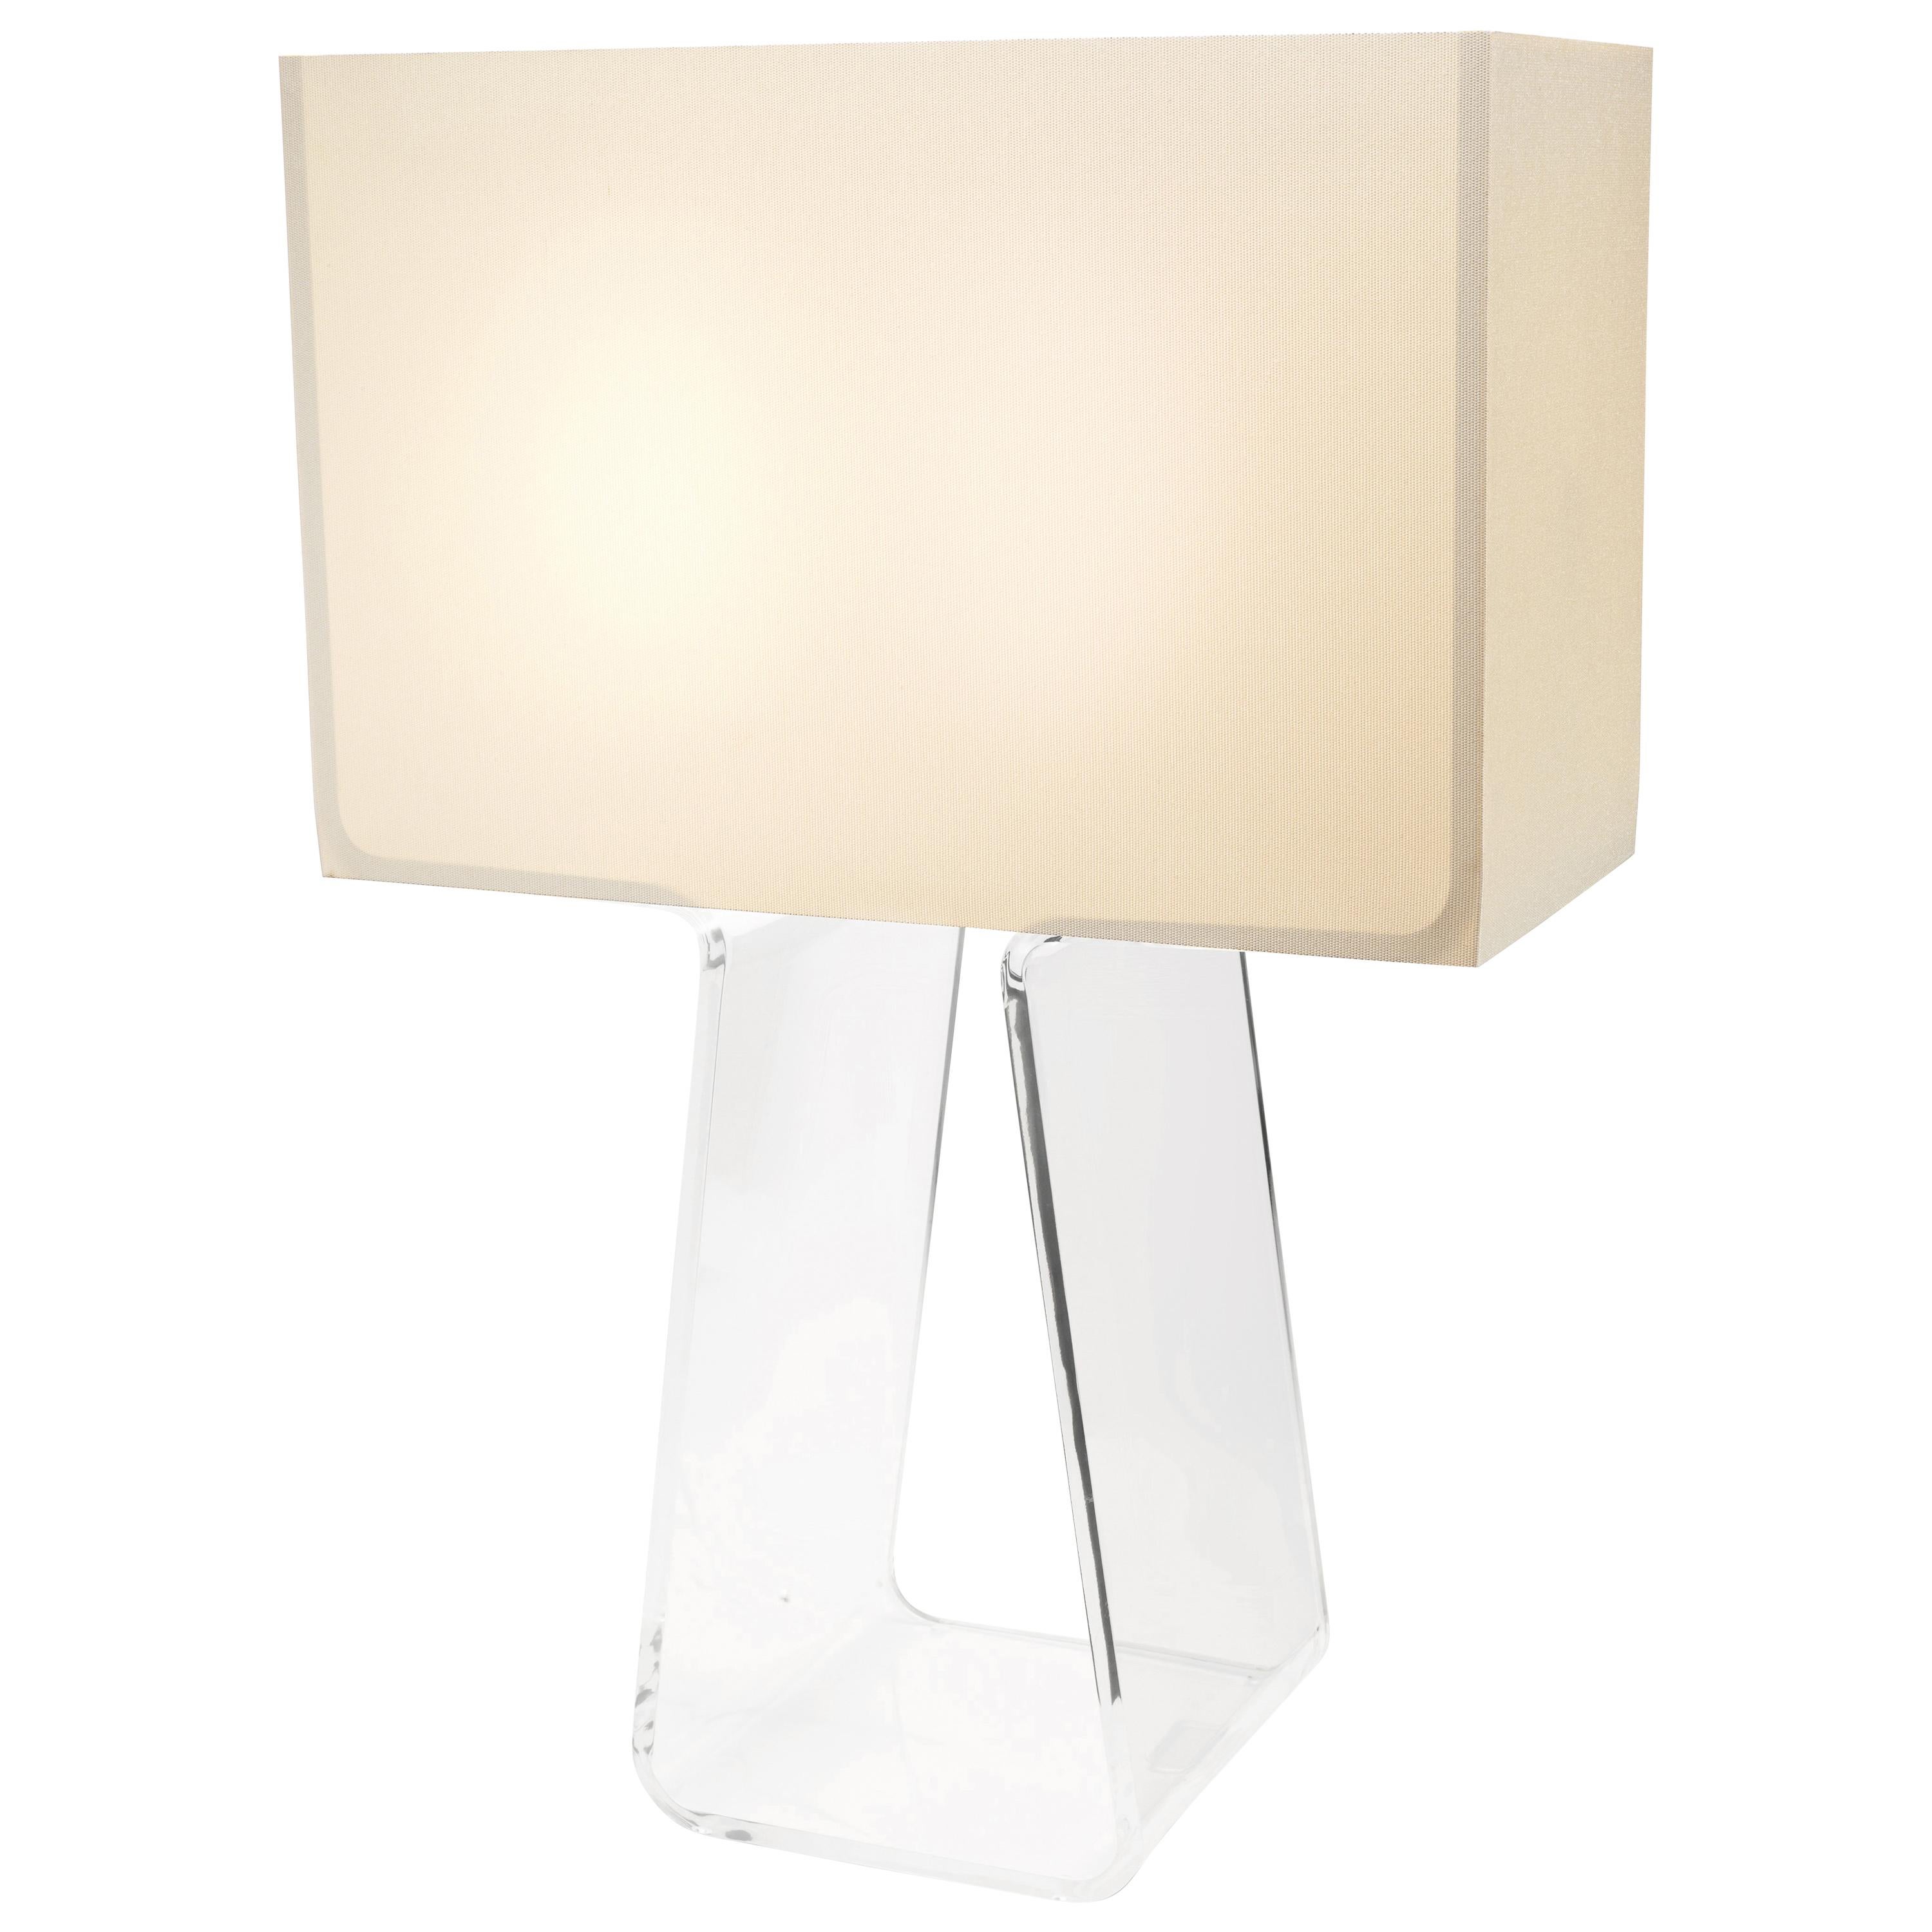 Tubetop 27 Table Lamp in White and Clear by Pablo Designs